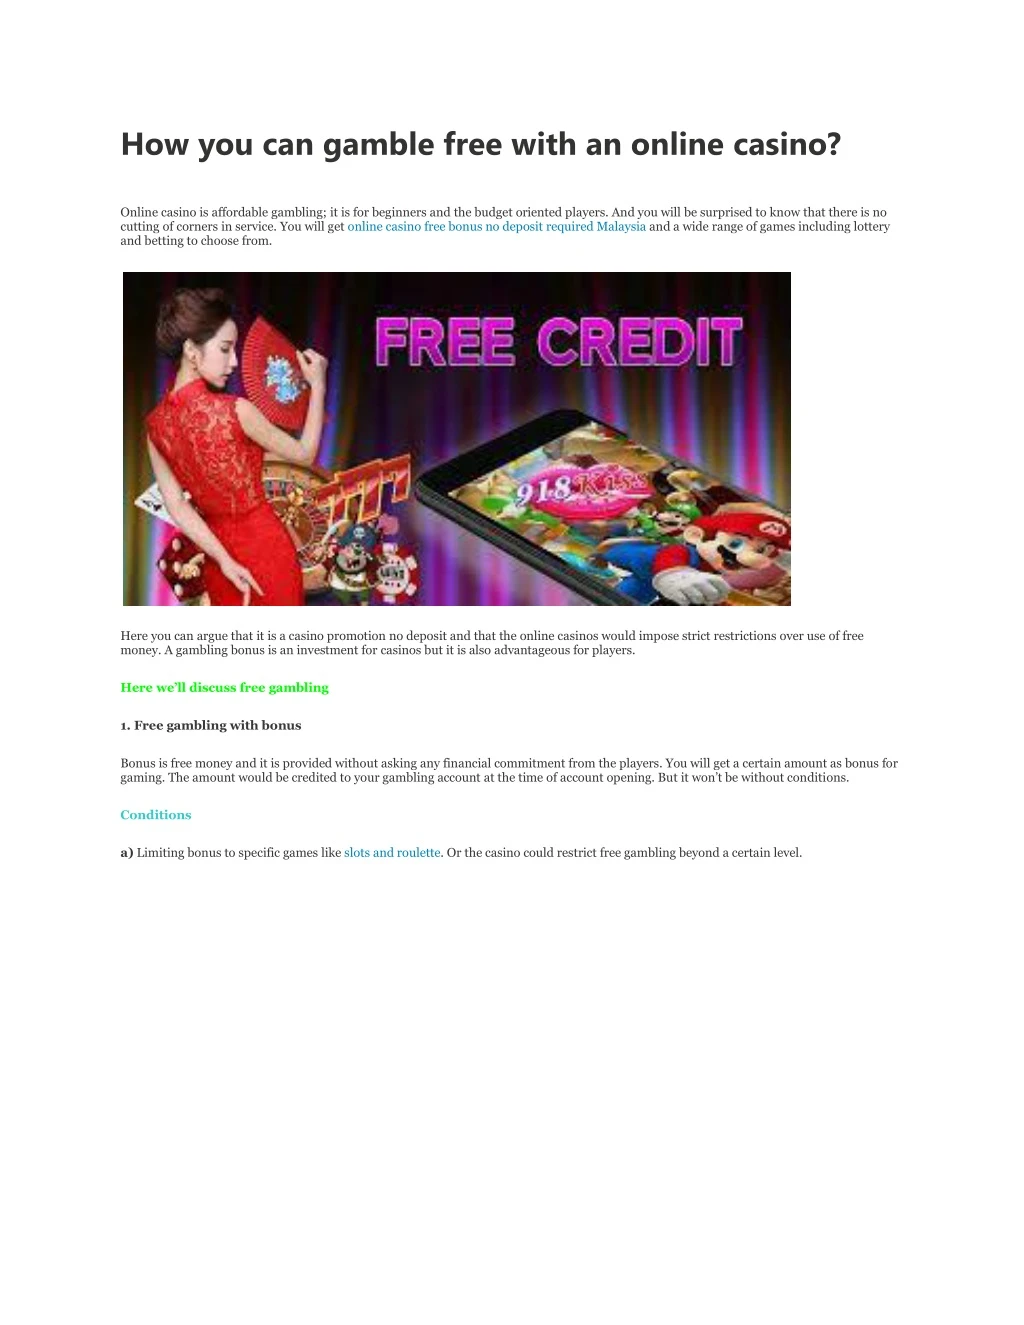 how you can gamble free with an online casino